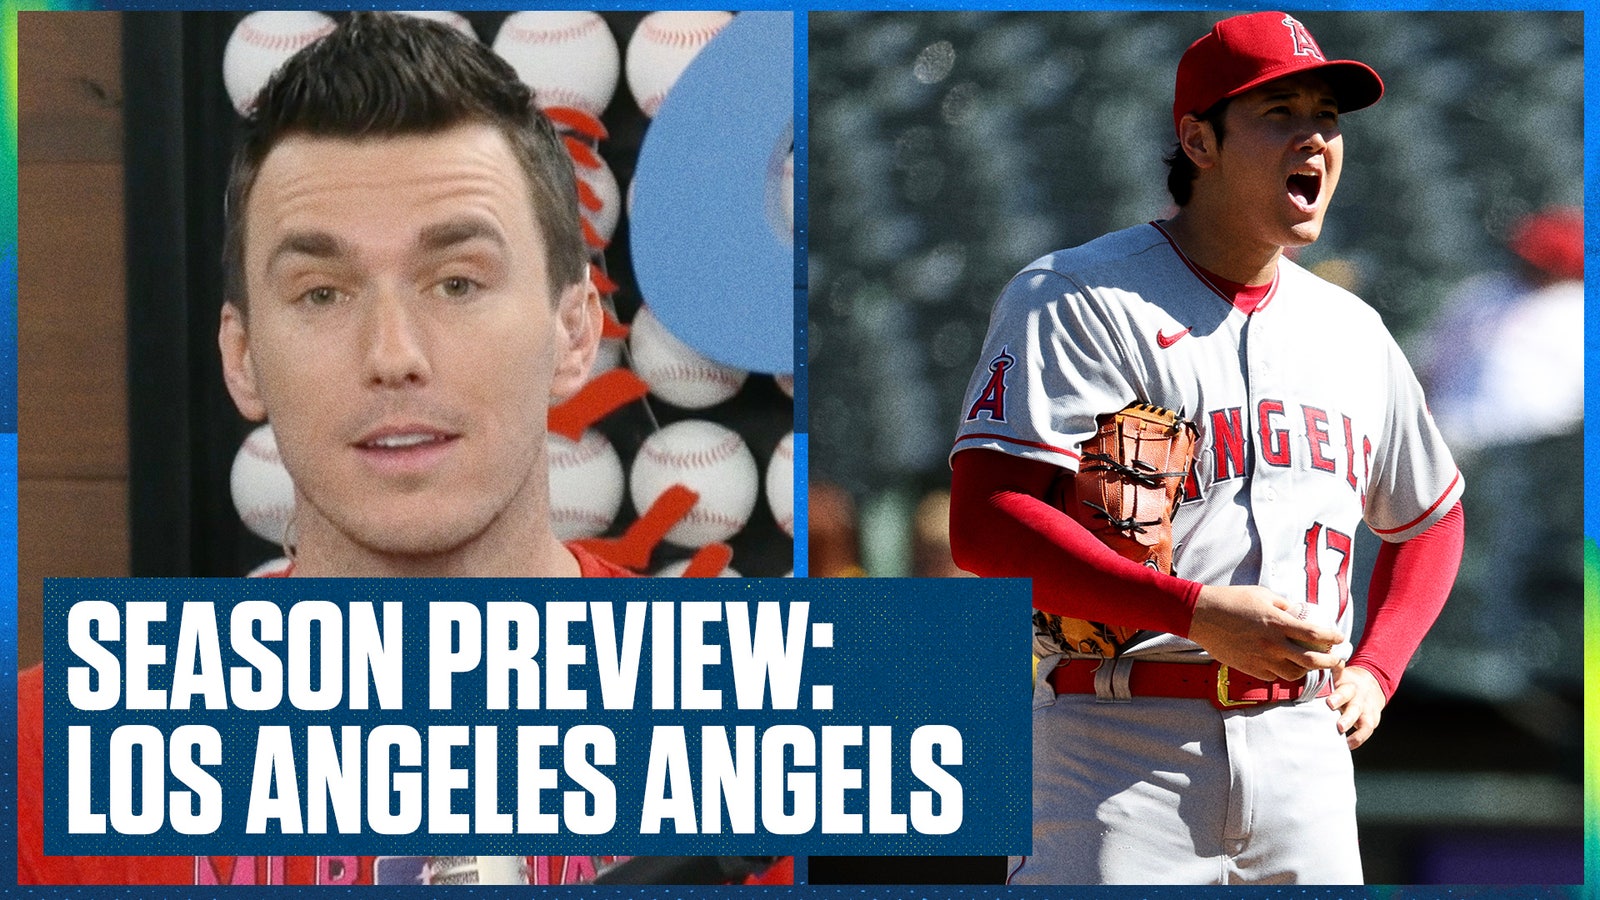 Angels season preview: Will Shohei Ohtani make the playoffs?